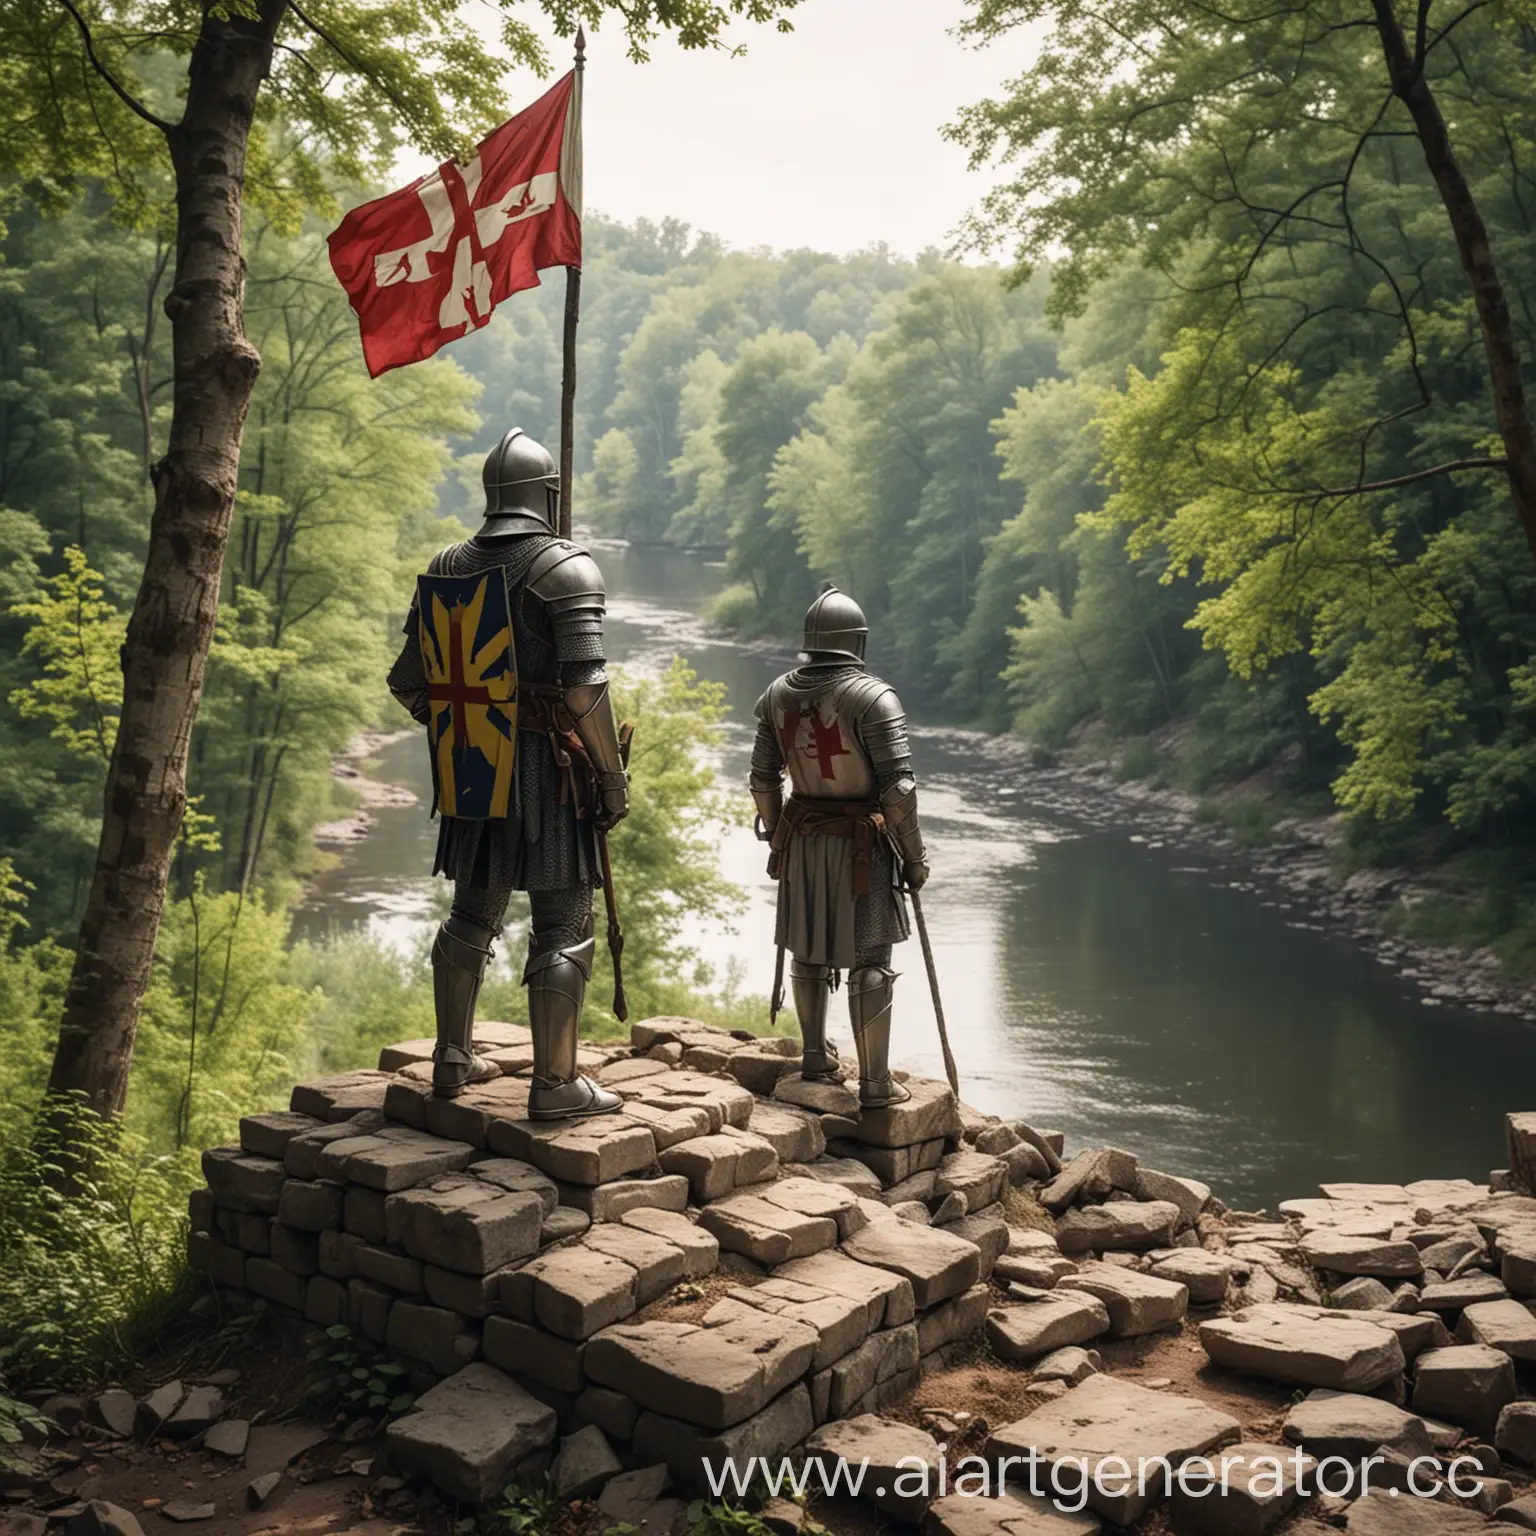 Knight-on-Stone-Ruins-Overlooking-Forest-and-River-with-Flag